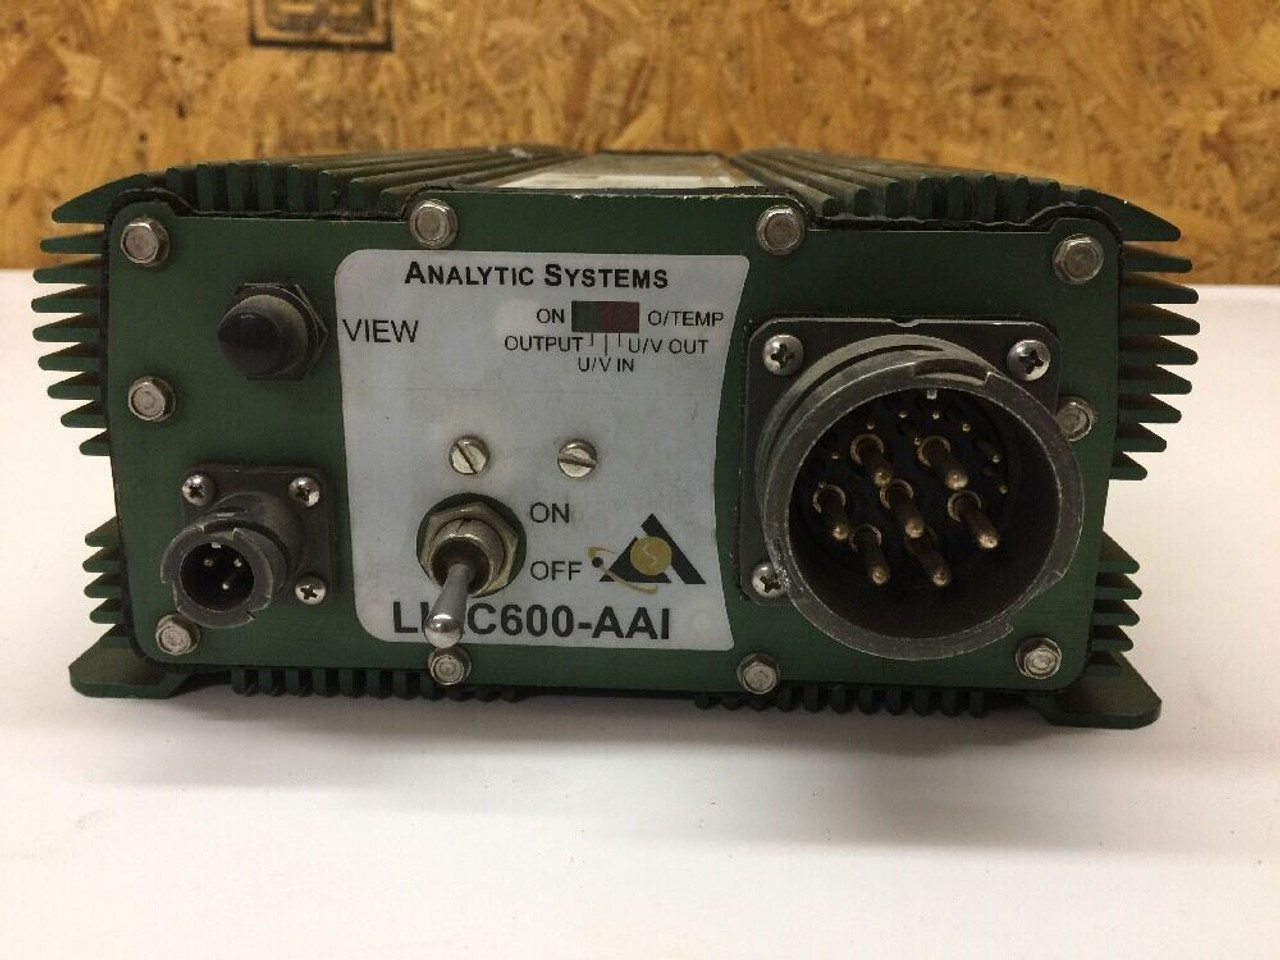 Power Supply LIAC600-AAI Analytic Systems Shadow Tactical UAS Ground Control 